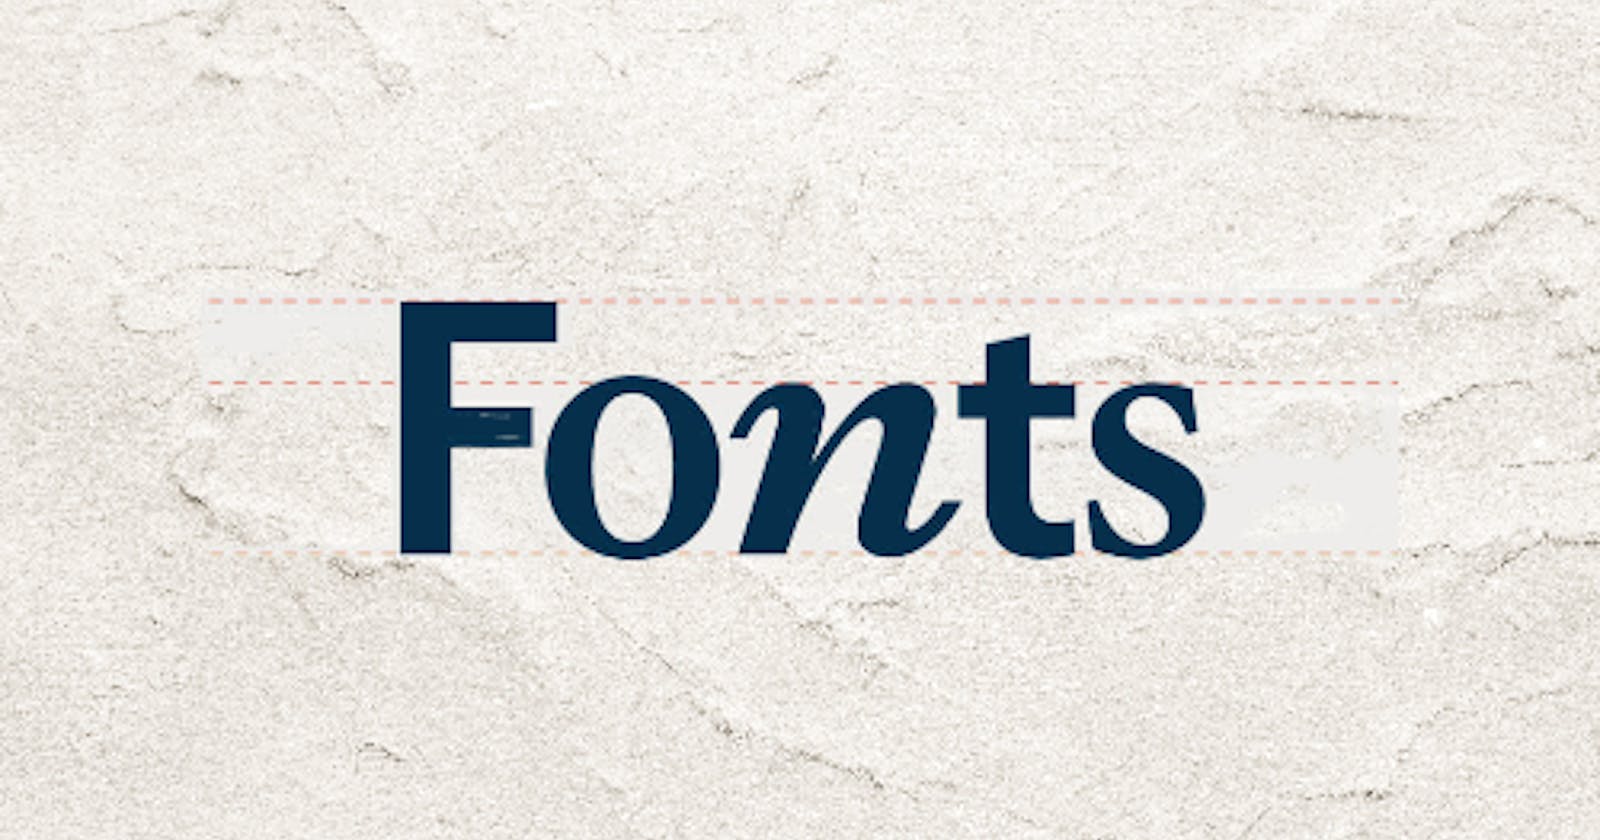 Impact of Fonts on web browsers